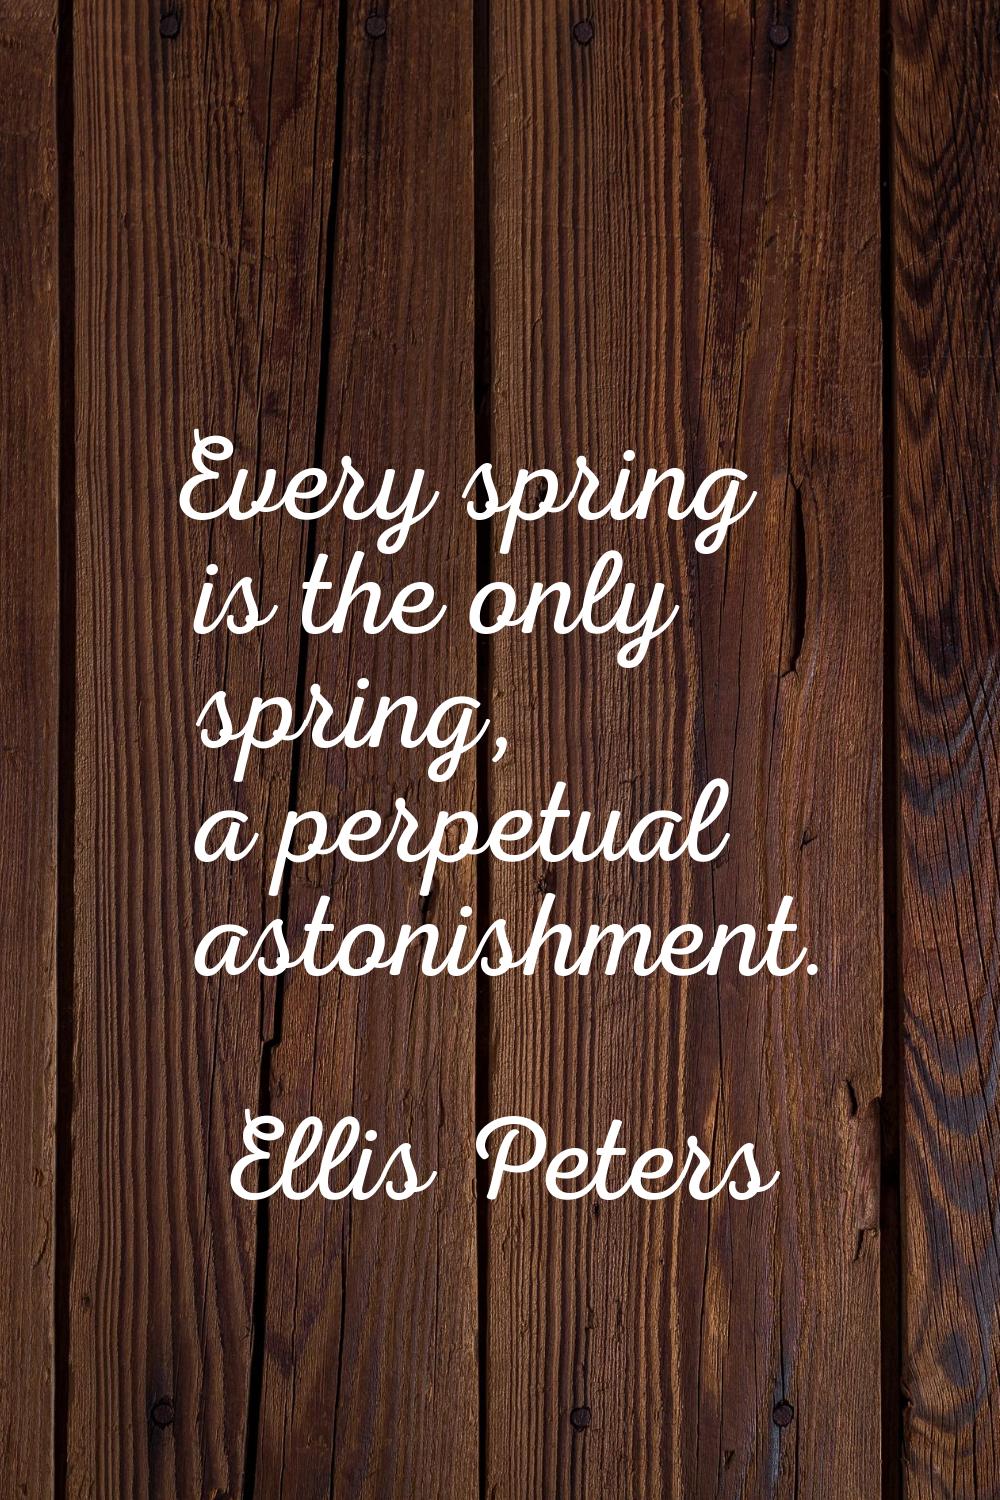 Every spring is the only spring, a perpetual astonishment.